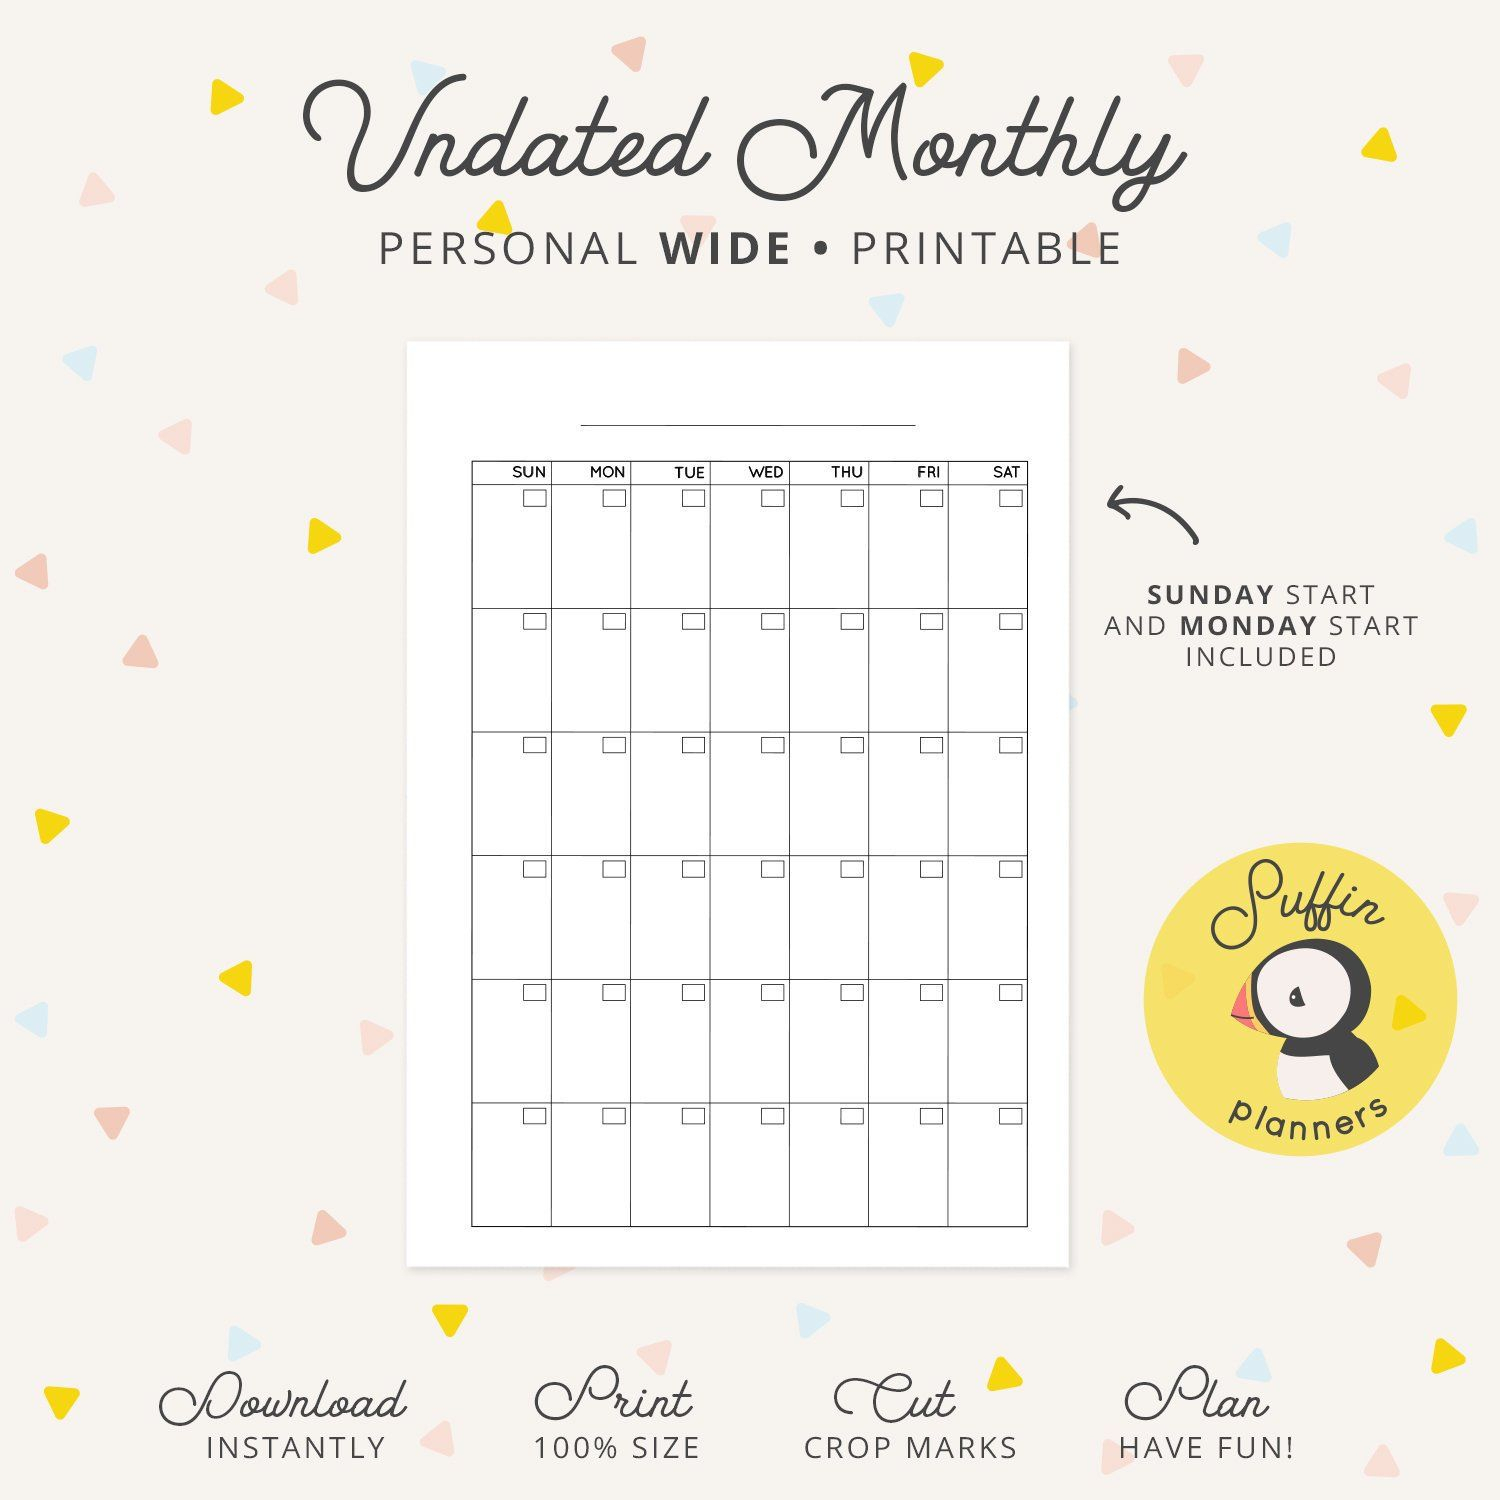 Undated Monthly Calendar Personal Wide Ring Printable